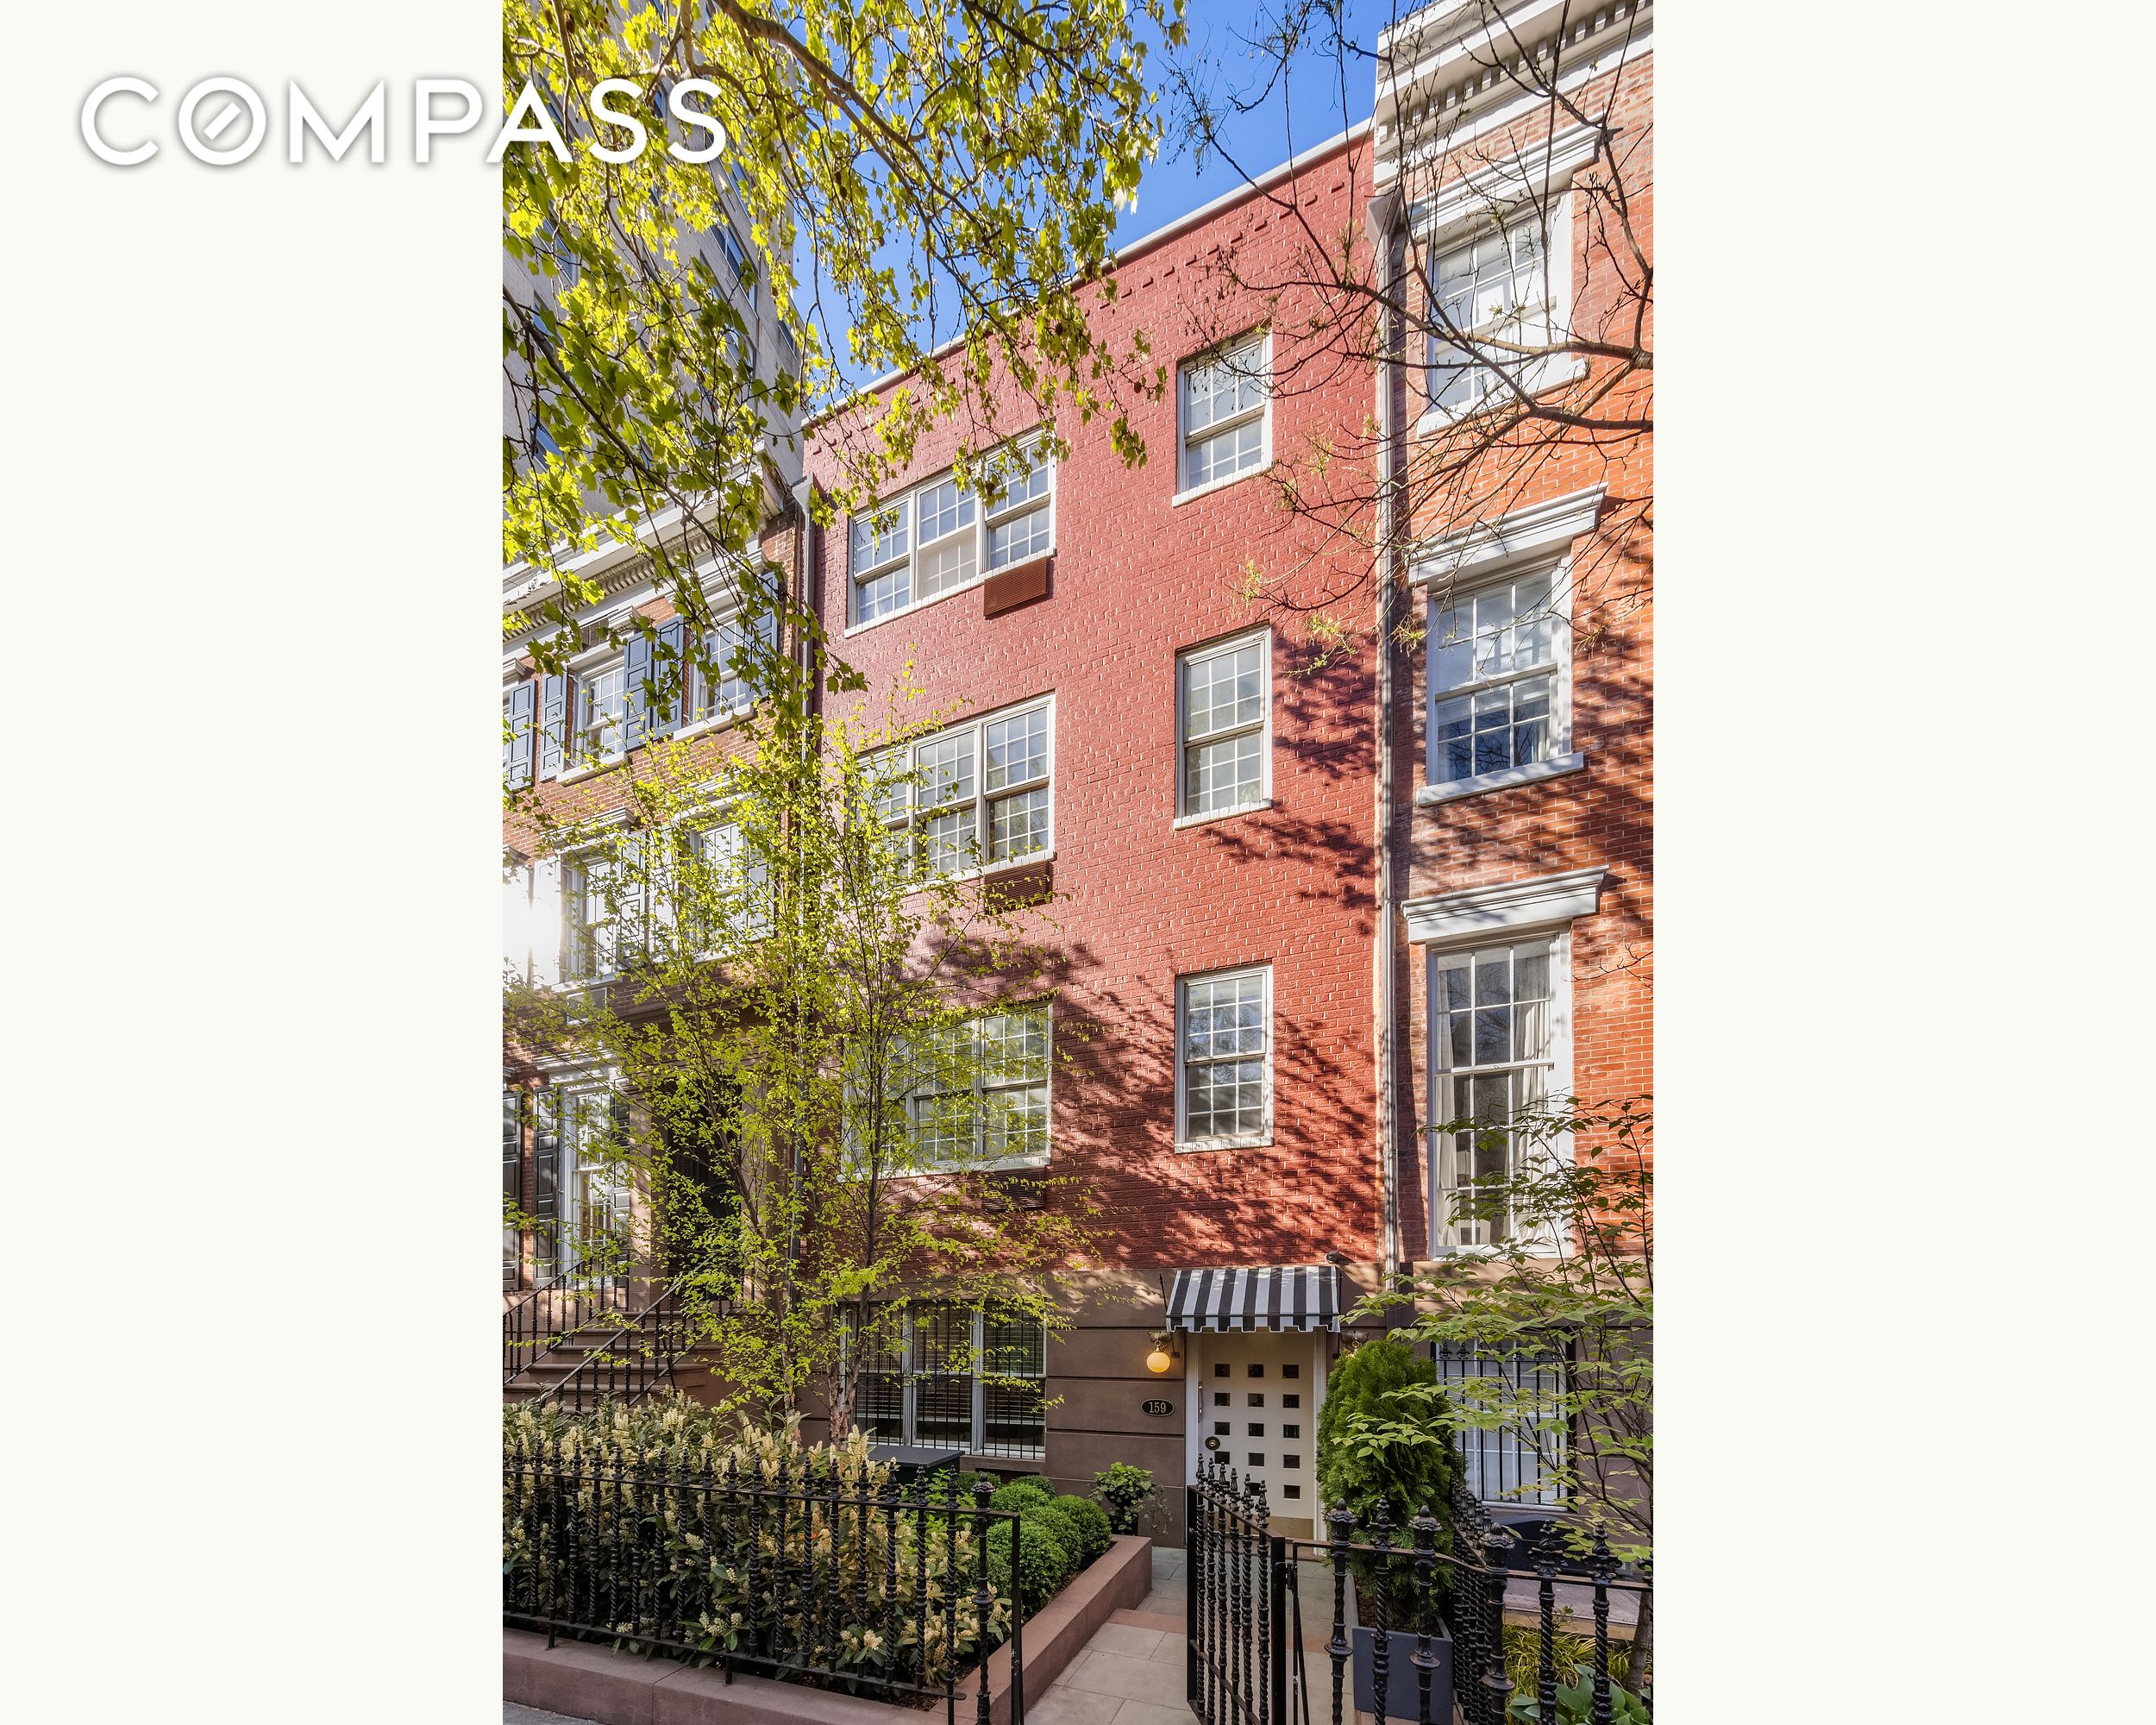 159 West 13th Street, West Village, Downtown, NYC - 7 Bedrooms  
5.5 Bathrooms  
12 Rooms - 